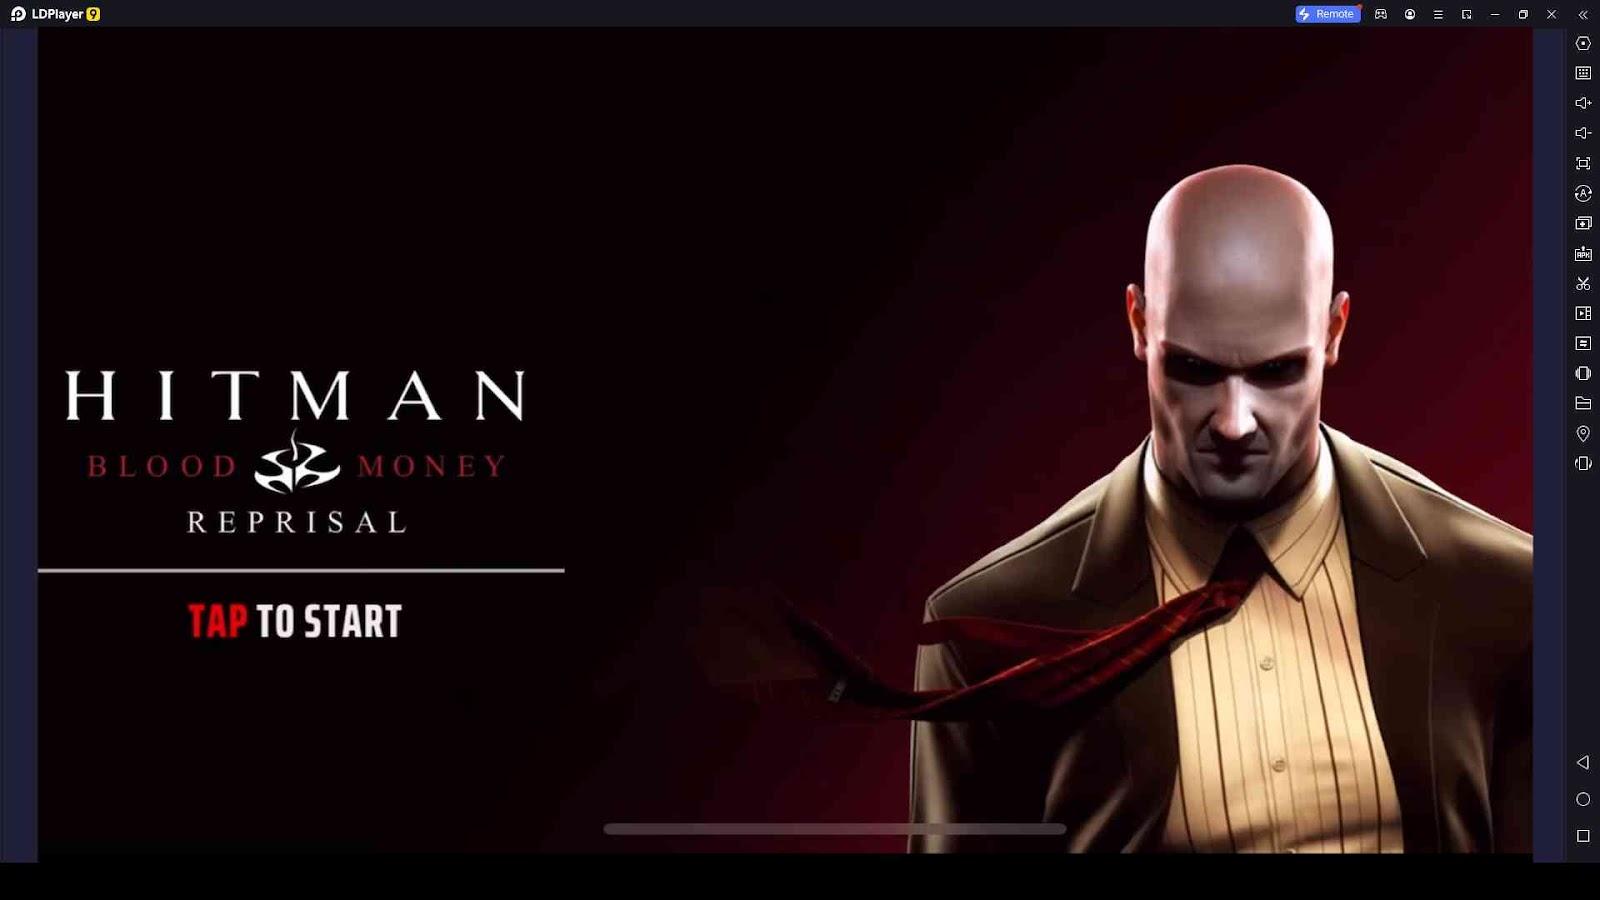  Hitman: Blood Money — Reprisal android 